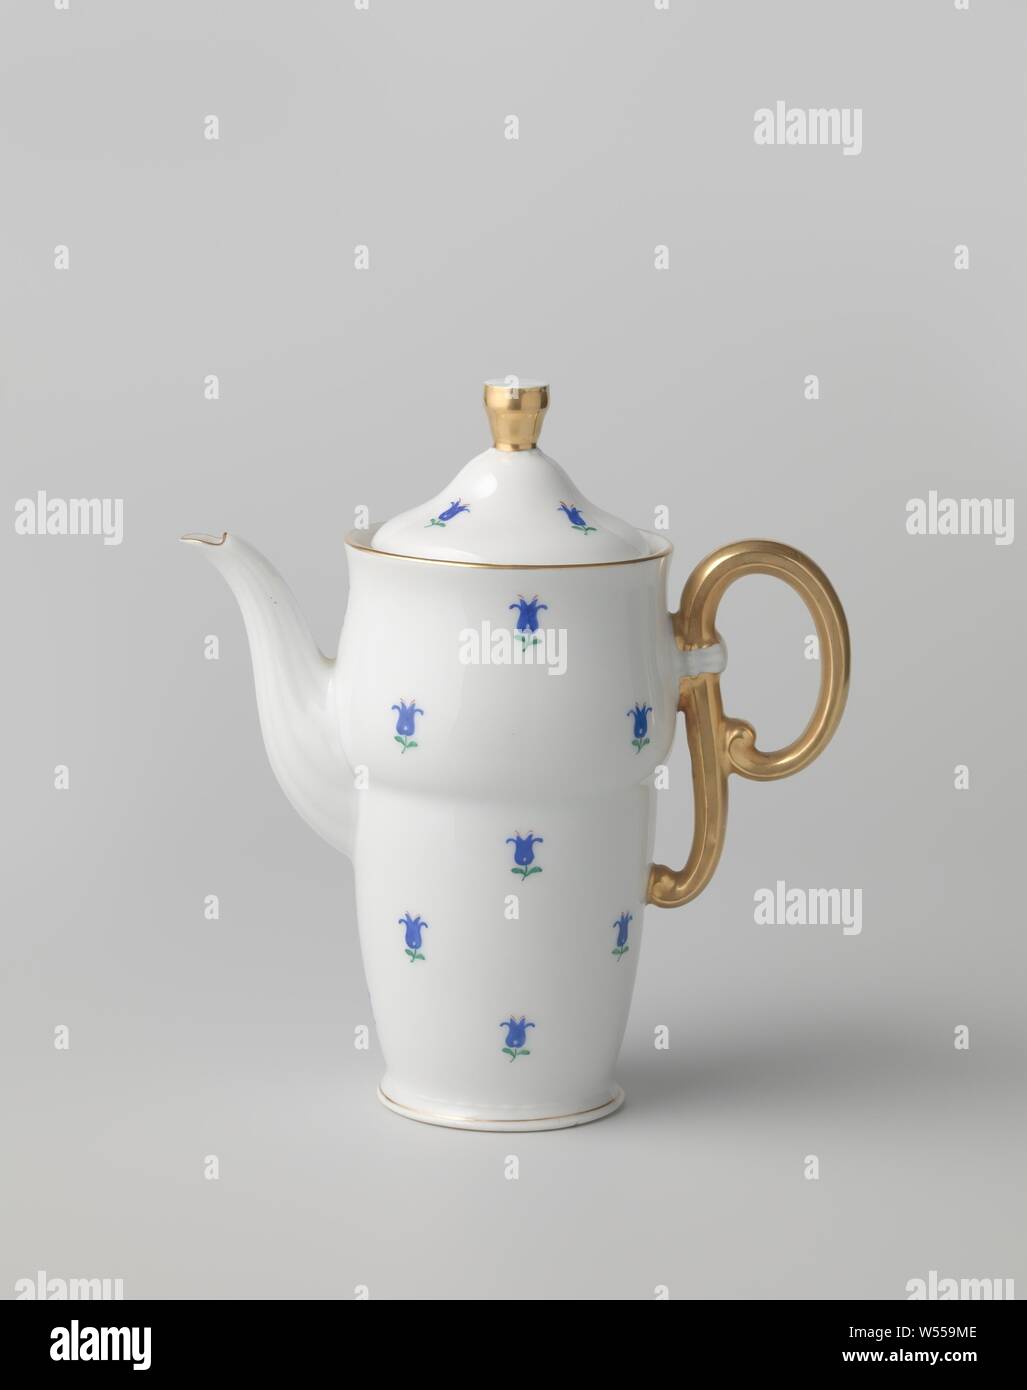 Cover of a coffee pot with flowers, Cover of a porcelain coffee pot painted on the glaze in blue, red, green and gold. Decorated with blue flowers and a conical, golden lid button., Pirkenhammer, Karlovy Vary, c. 1935, porcelain (material), glaze, gold (metal), vitrification, h 6.4 cm d 7.4 cm Stock Photo